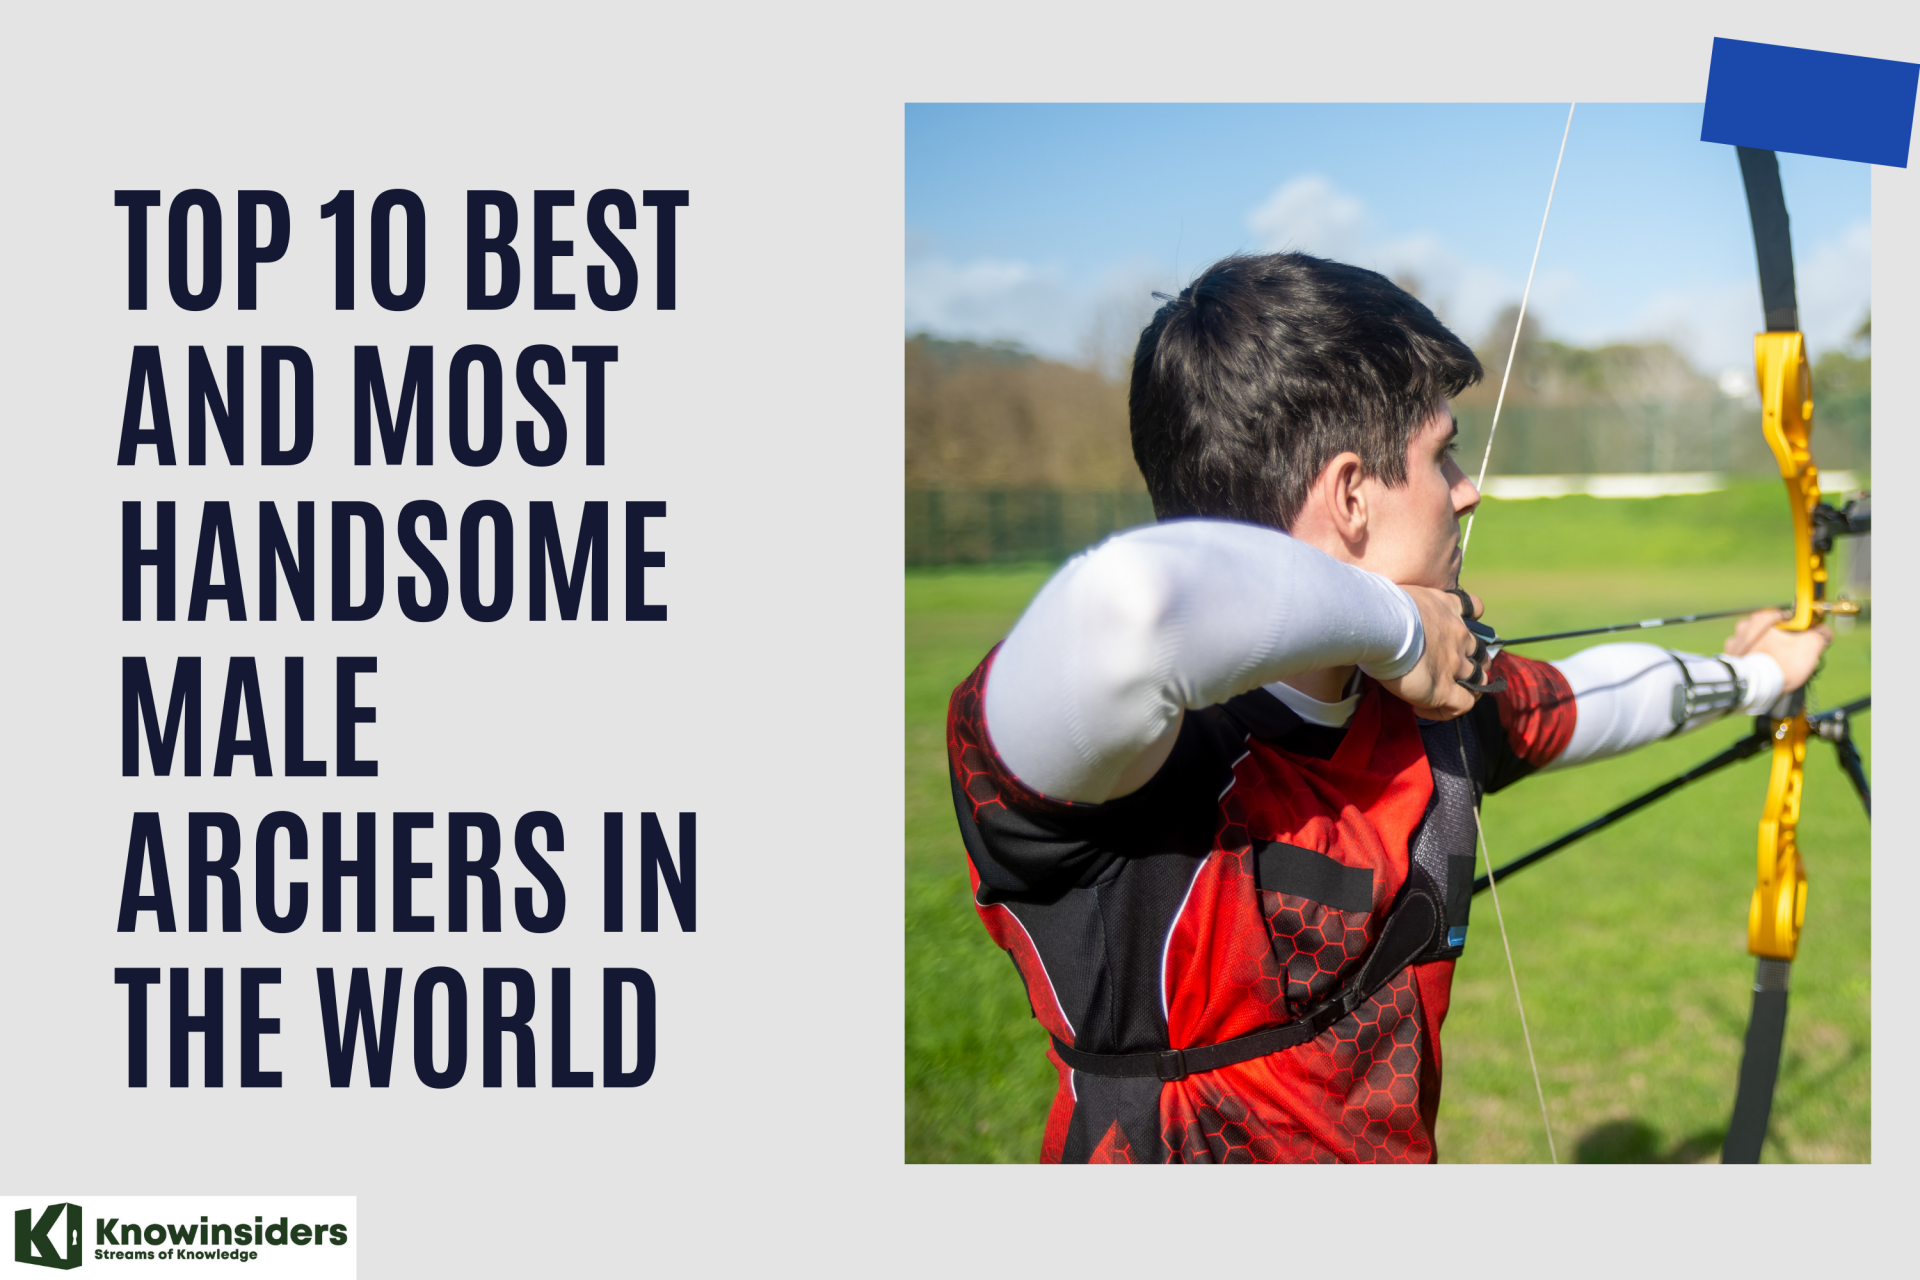 Top 10 Best and Most Handsome Male Archers in the World